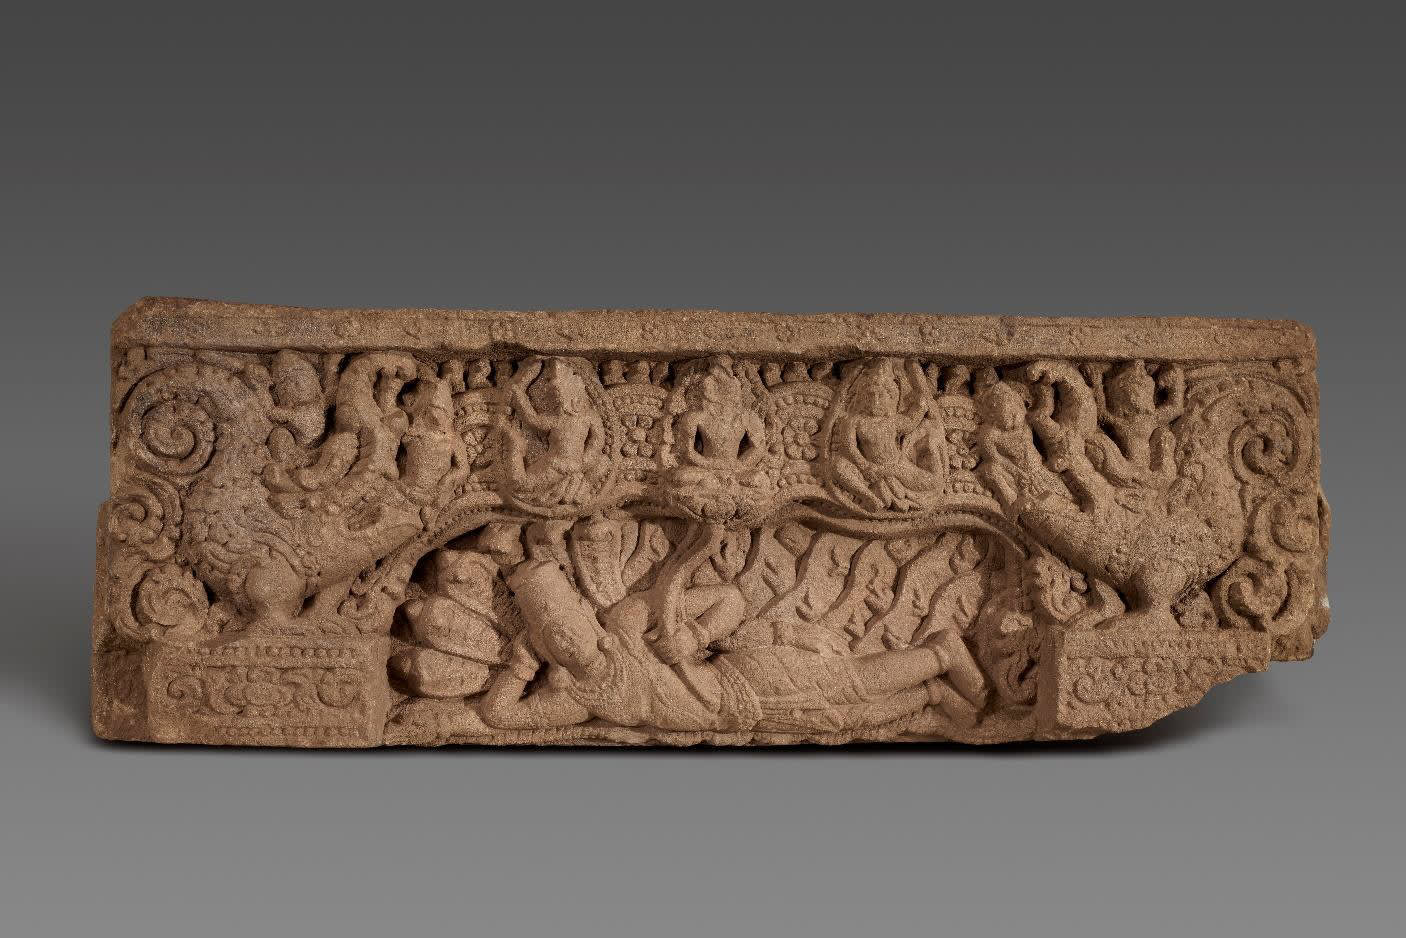 Feds intervene to help Cambodia recover looted artifacts from Denver museum